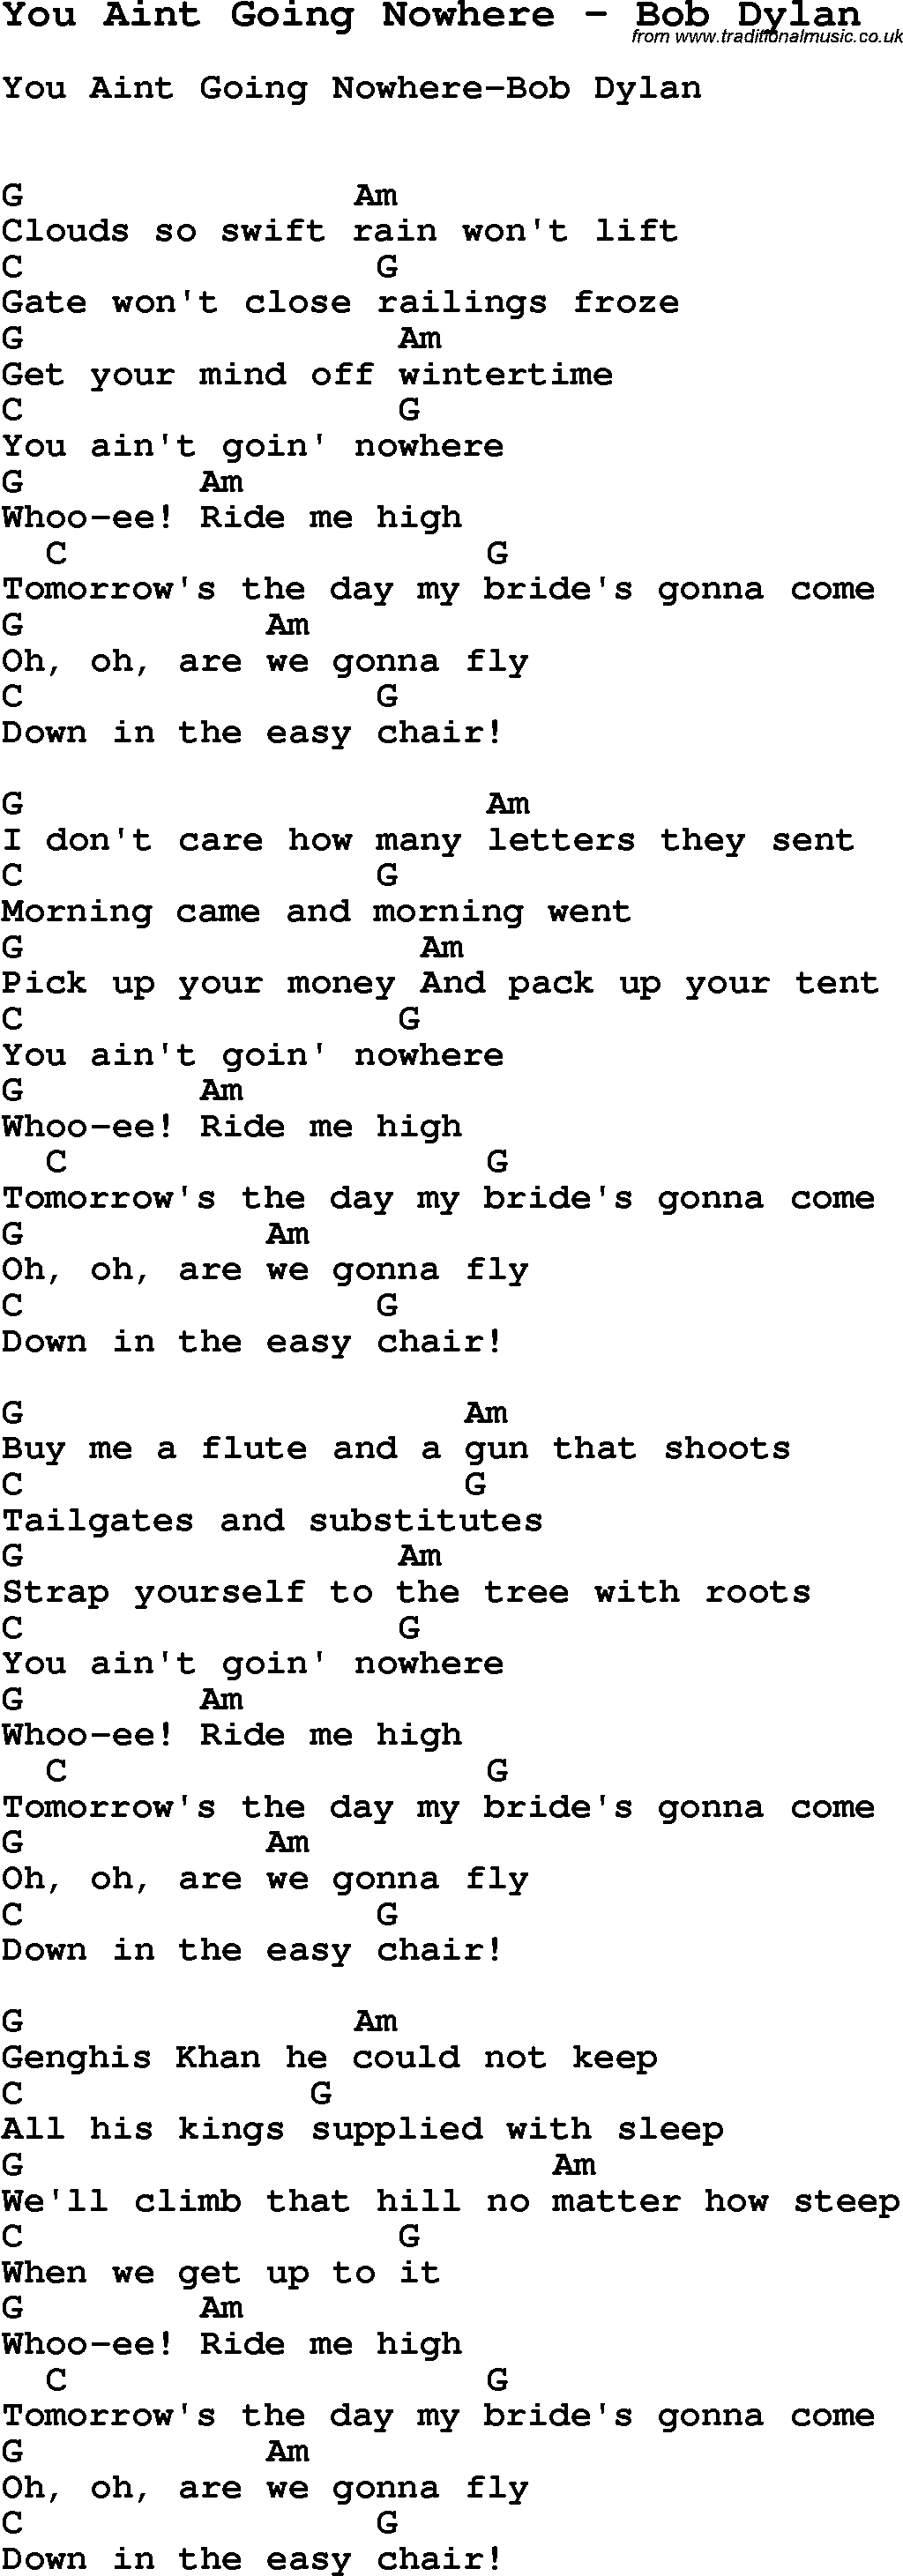 Song You Aint Going Nowhere by Bob Dylan, with lyrics for vocal performance and accompaniment chords for Ukulele, Guitar Banjo etc.